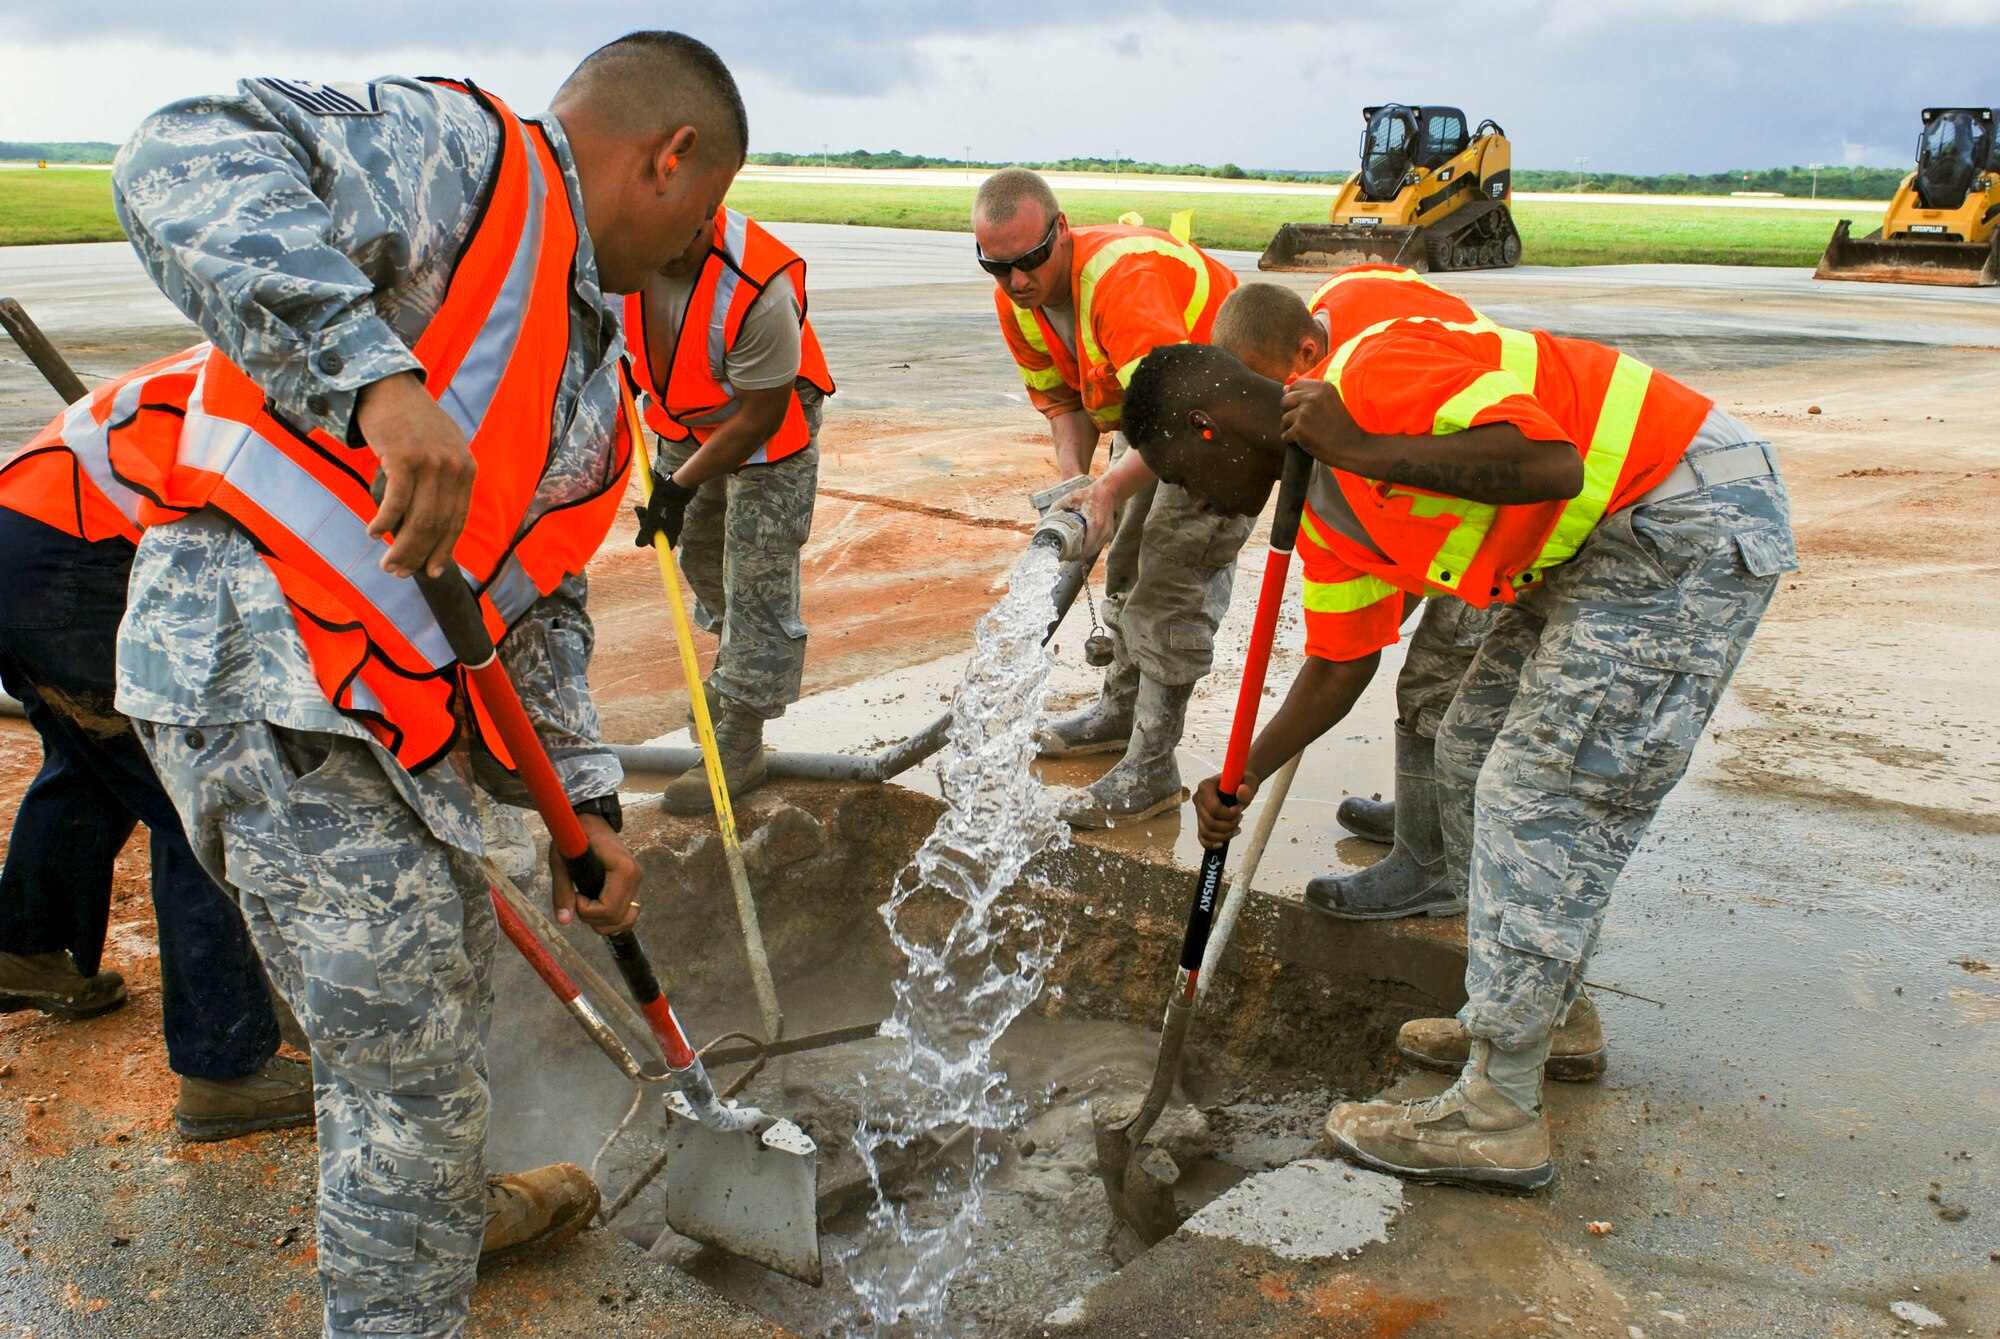 36th Civil Engineer Squadron Airmen mix water and a low-strength concrete together during airfield damage repair training exercise Jan. 23, 2014, at Andersen Air Force Base, Guam. The 36th Civil Engineer Squadron was one of the first units in the Air Force to receive training on a new airfield damage repair capability. (U.S. Air Force photo/Airman 1st Class Emily A. Bradley)